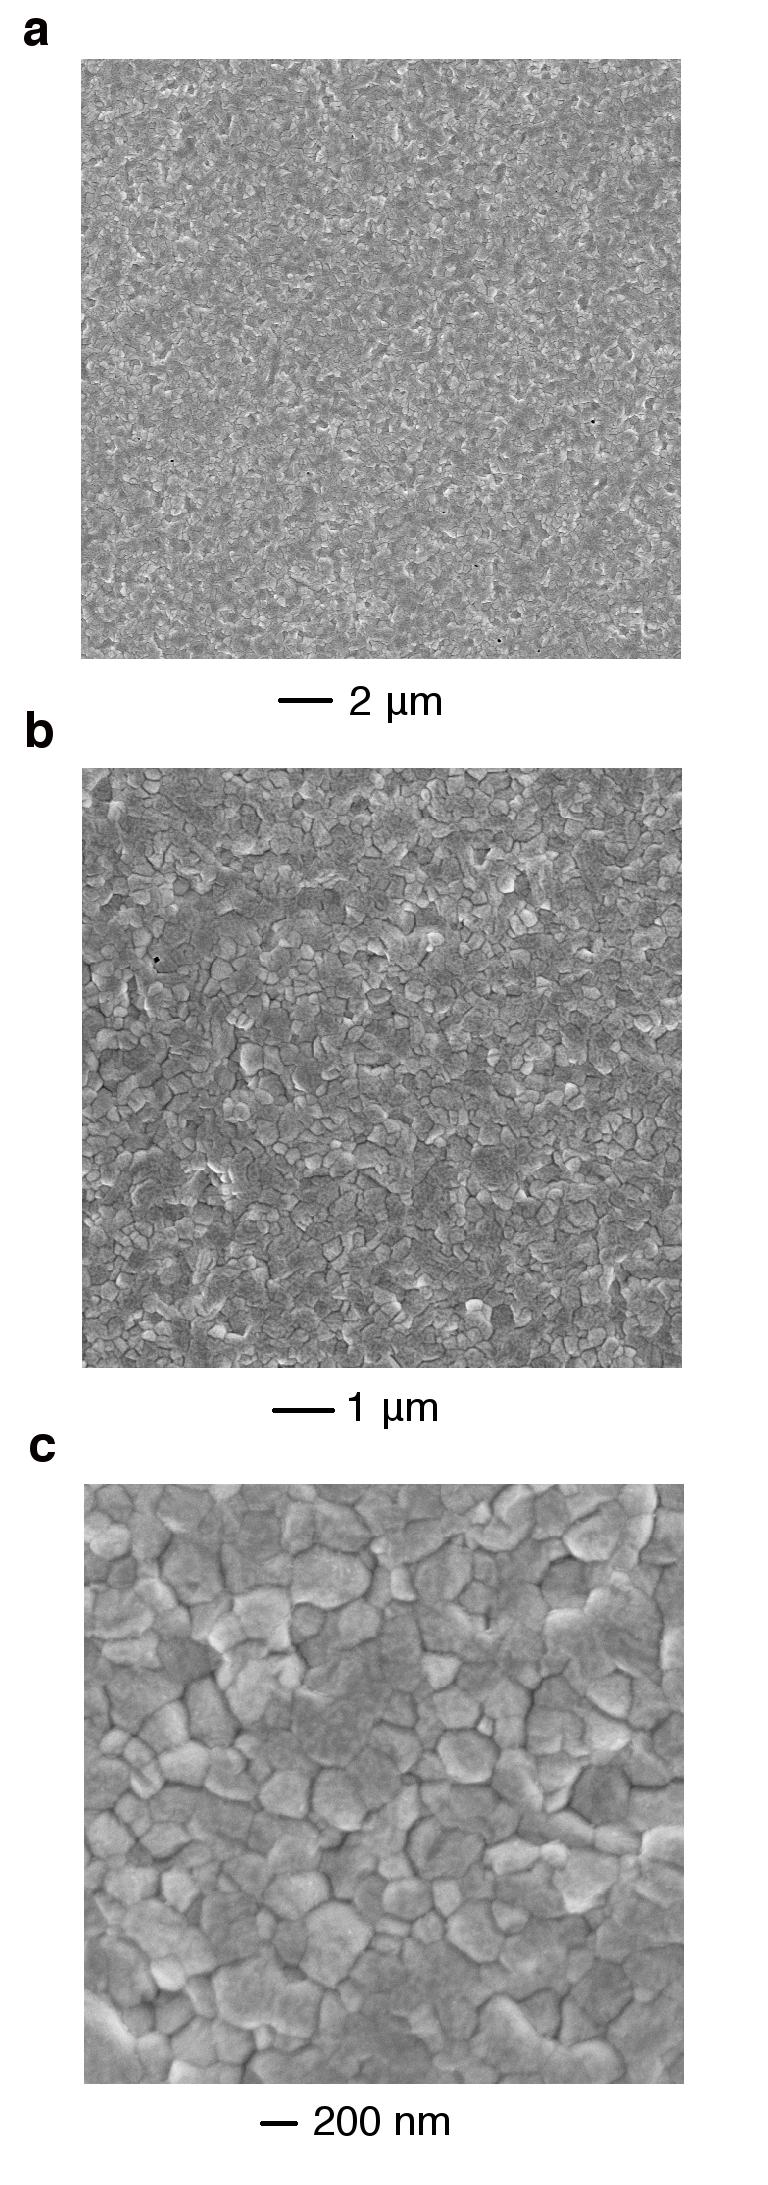 Supplementary Figure 2. SEM images of CH3NH3PbI3 after solvent annealing.